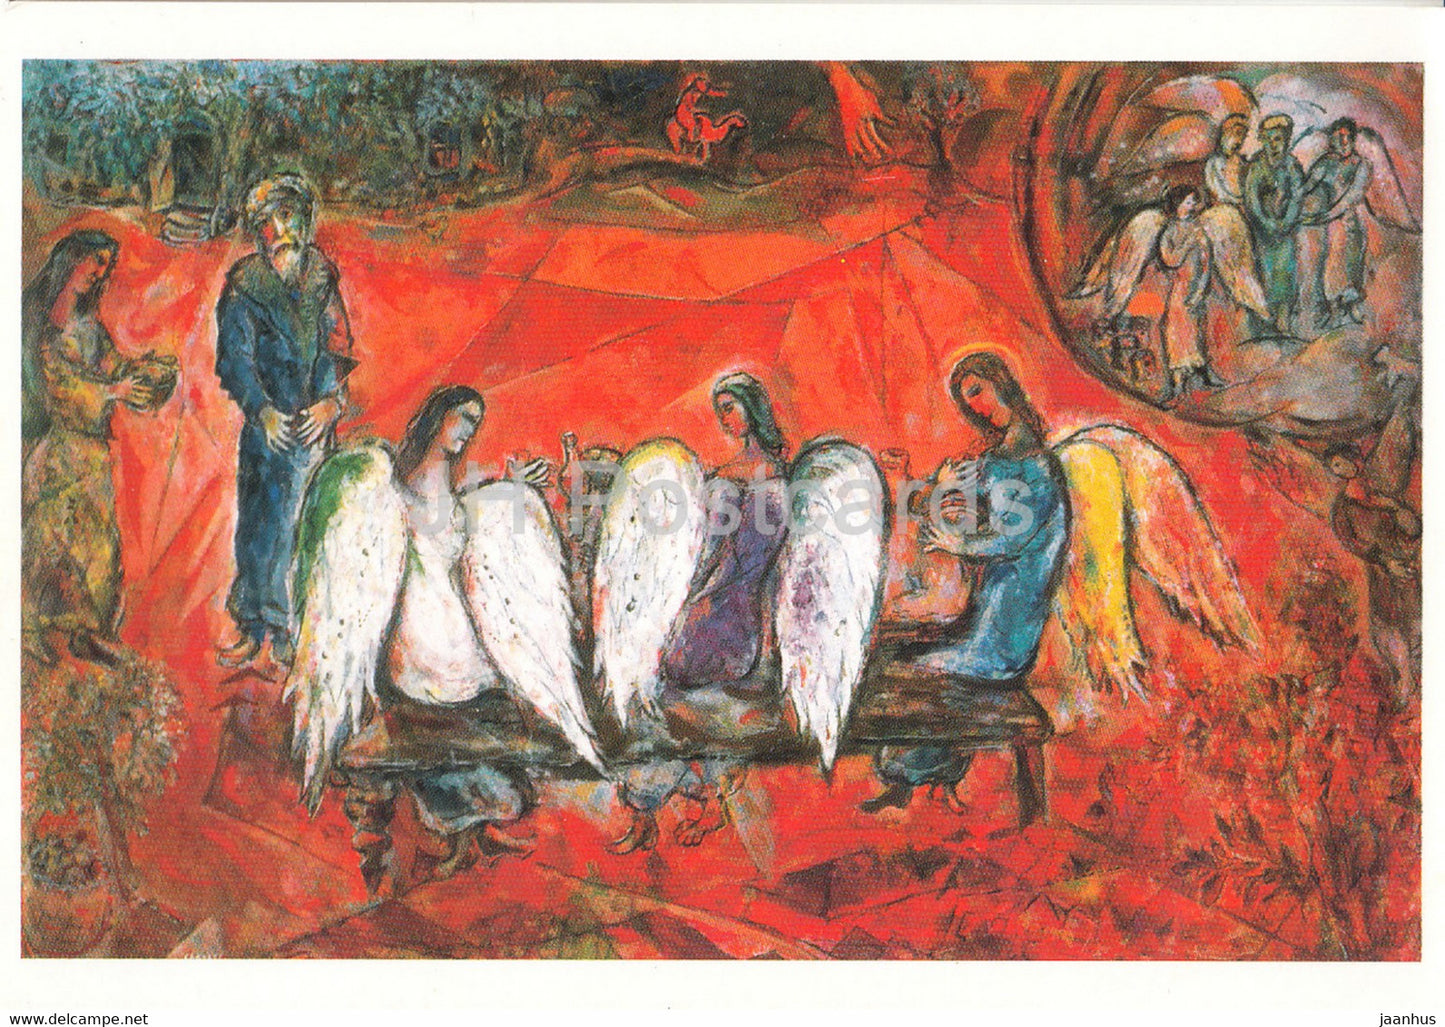 painting by Marc Chagall - Abraham et les trois Anges - Russian art - France - unused - JH Postcards